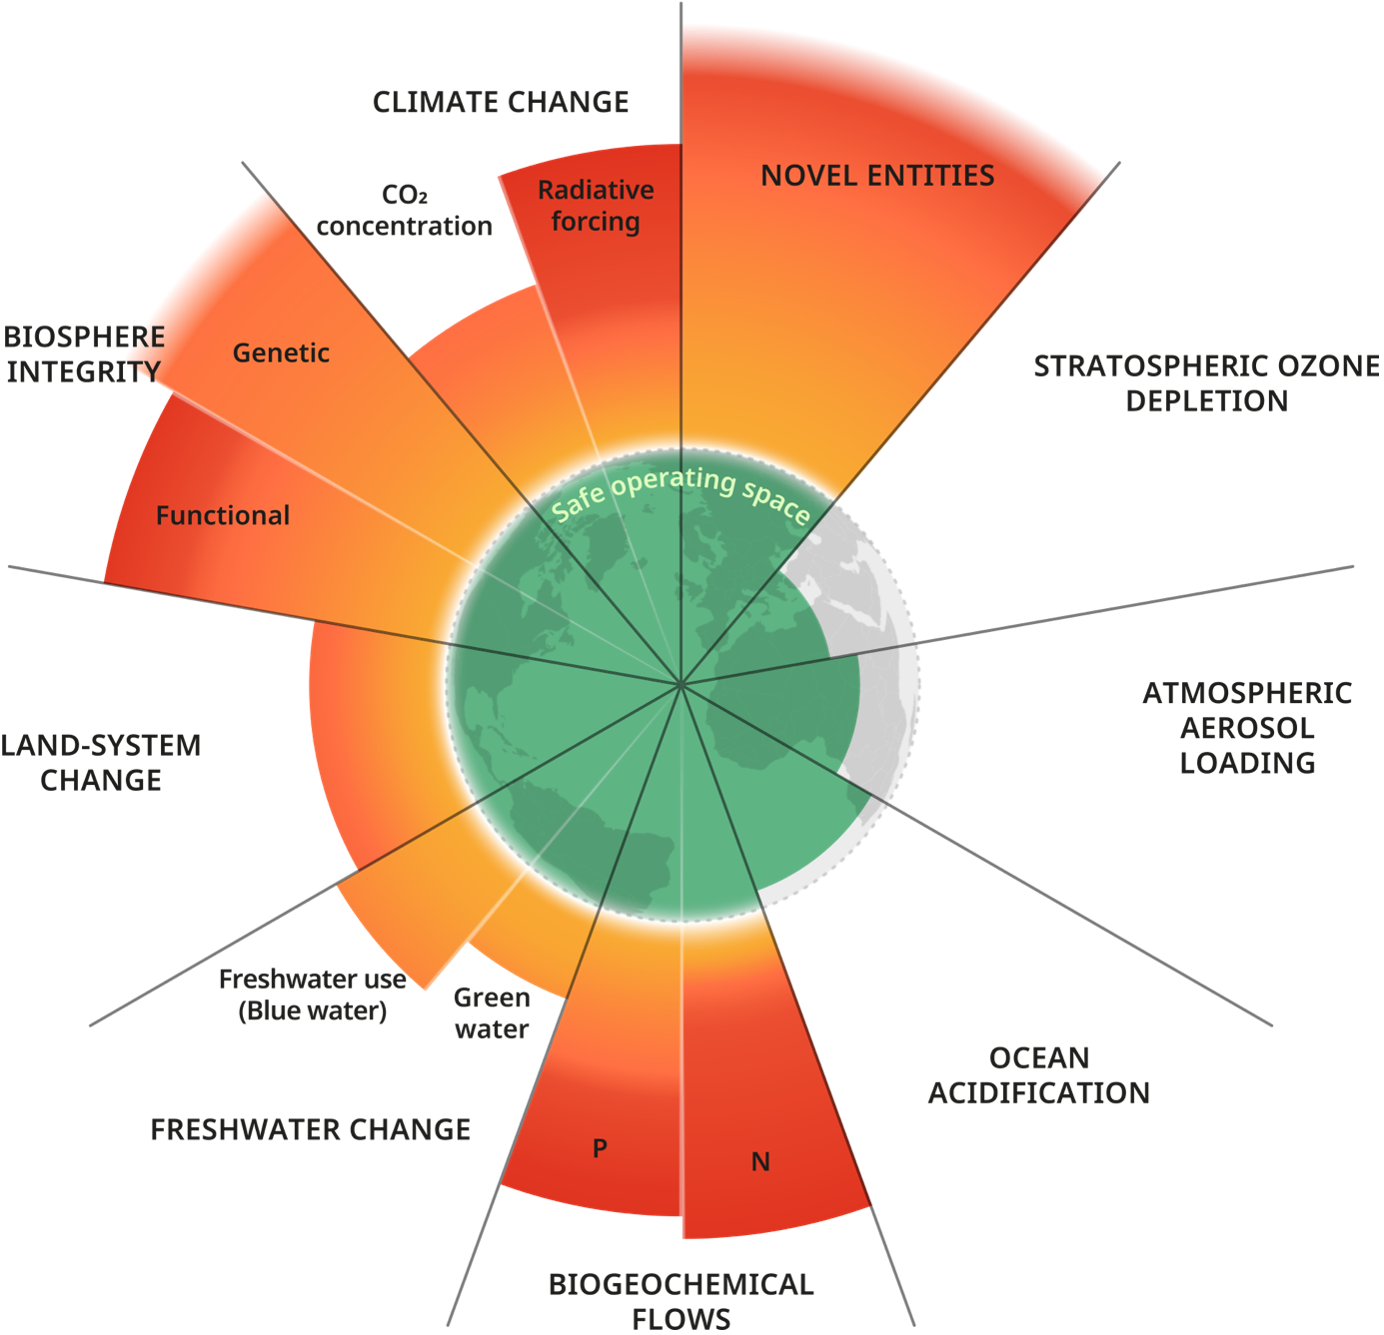 The updated planetary boundaries framework serves as a stark reminder of the escalating anthropogenic impacts on the planet, necessitating urgent and holistic approaches to safeguard Earth's stability and humanity's well-being.